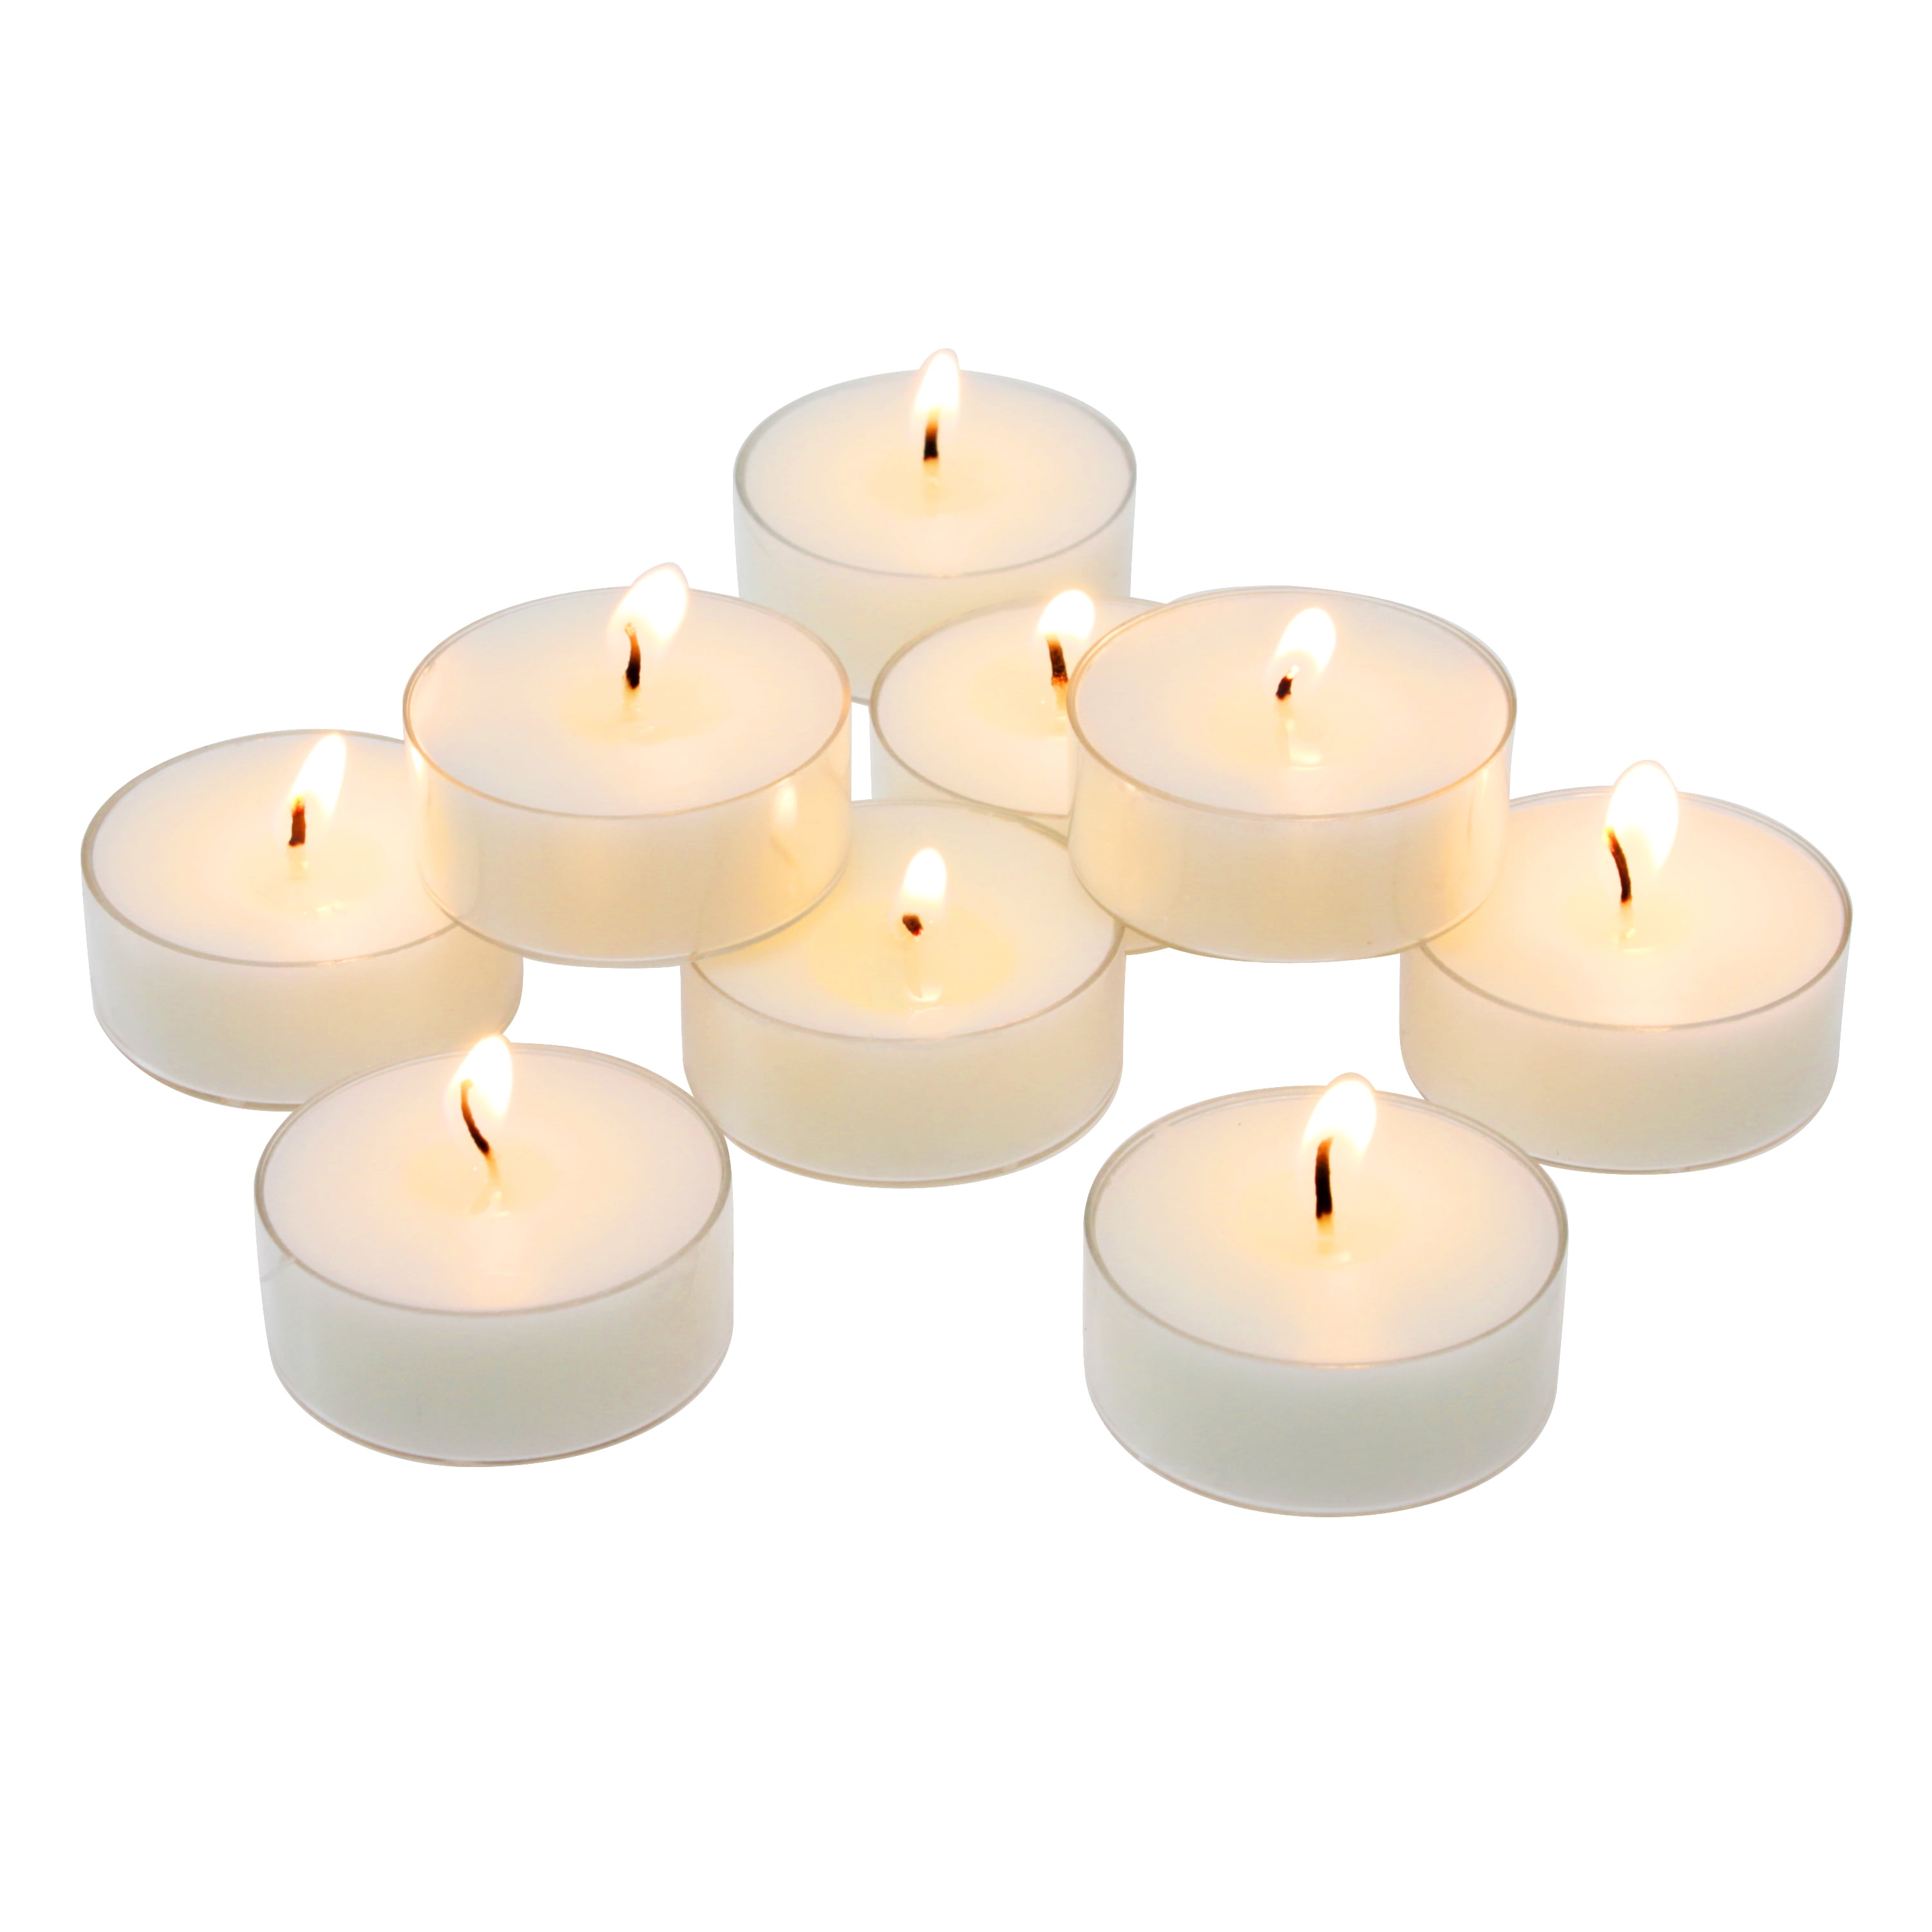 Prices Candles Tealights Citronella Fragrance Garden Pack of 25 